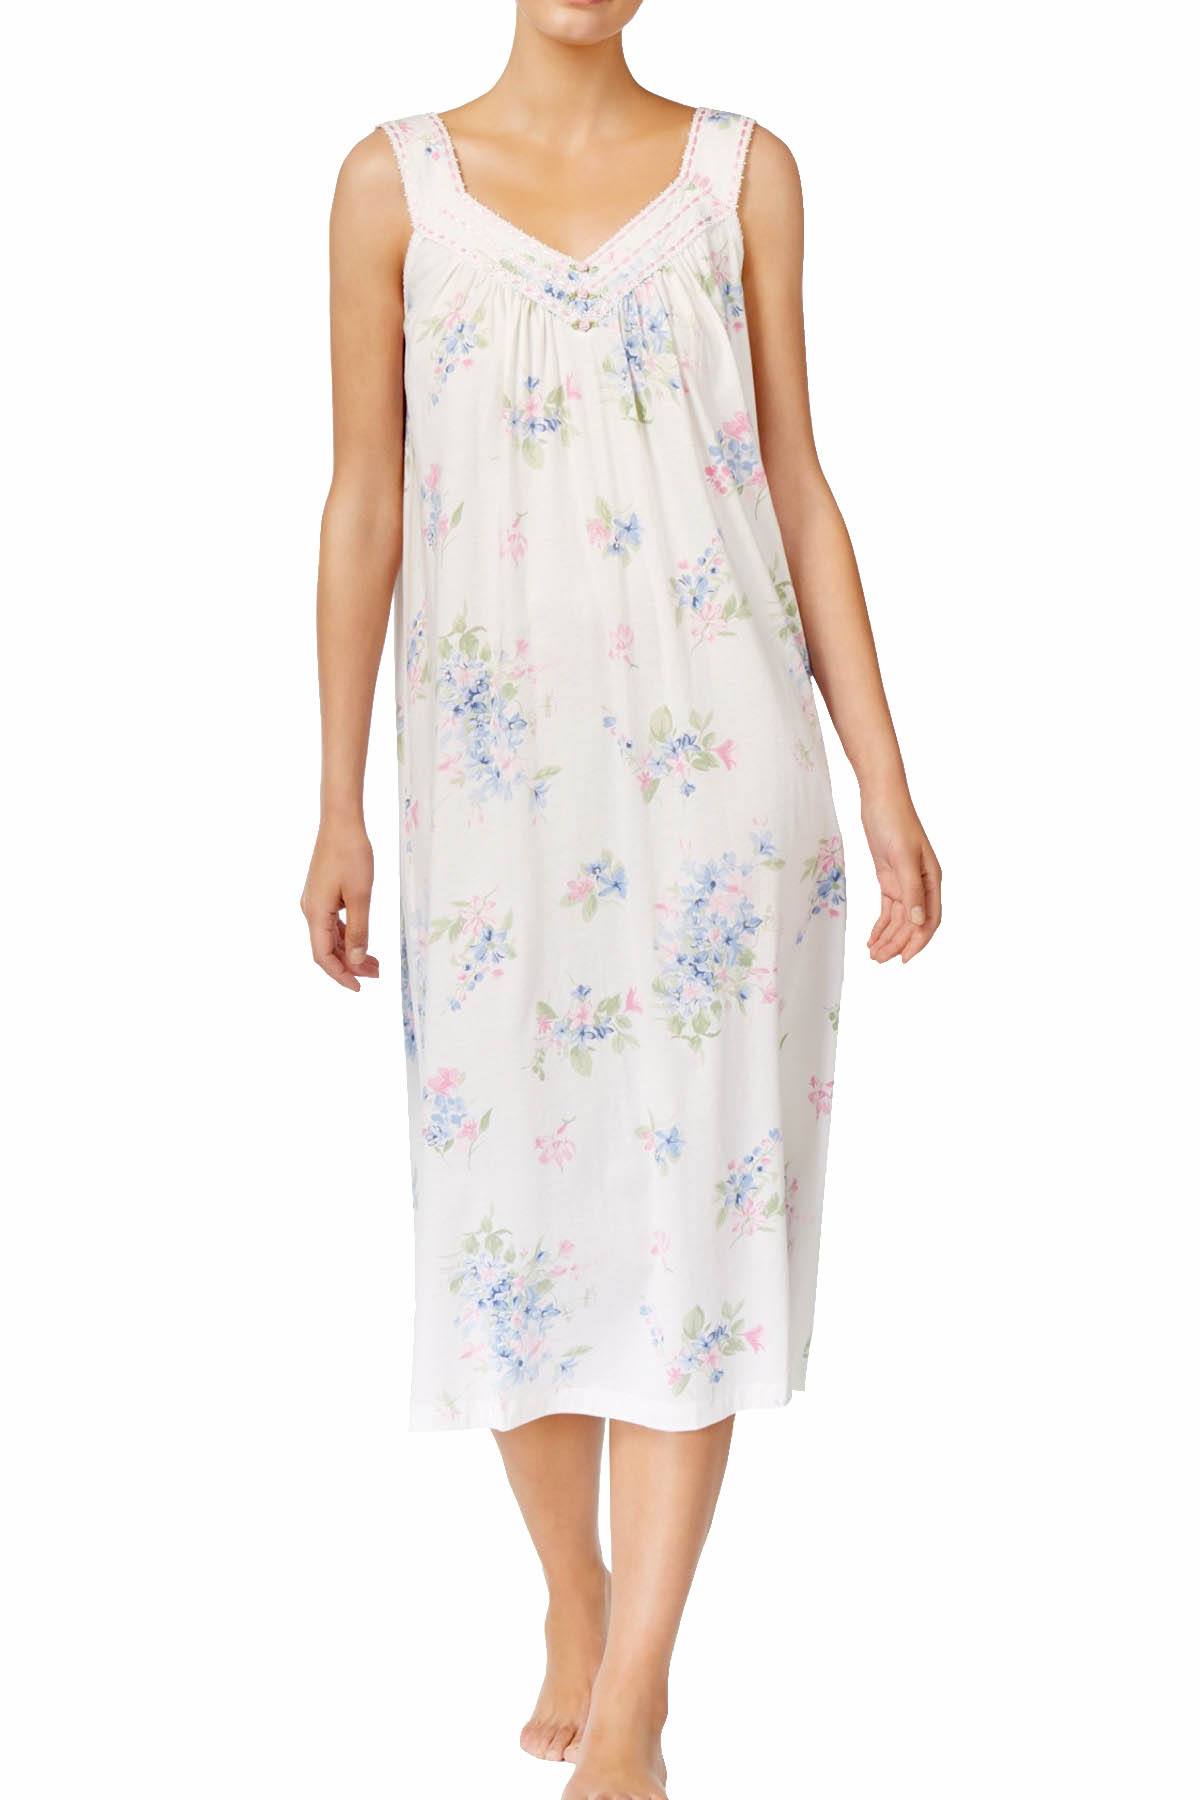 Charter Club Intimates Fall-Floral Printed Cotton-Knit Nightgown